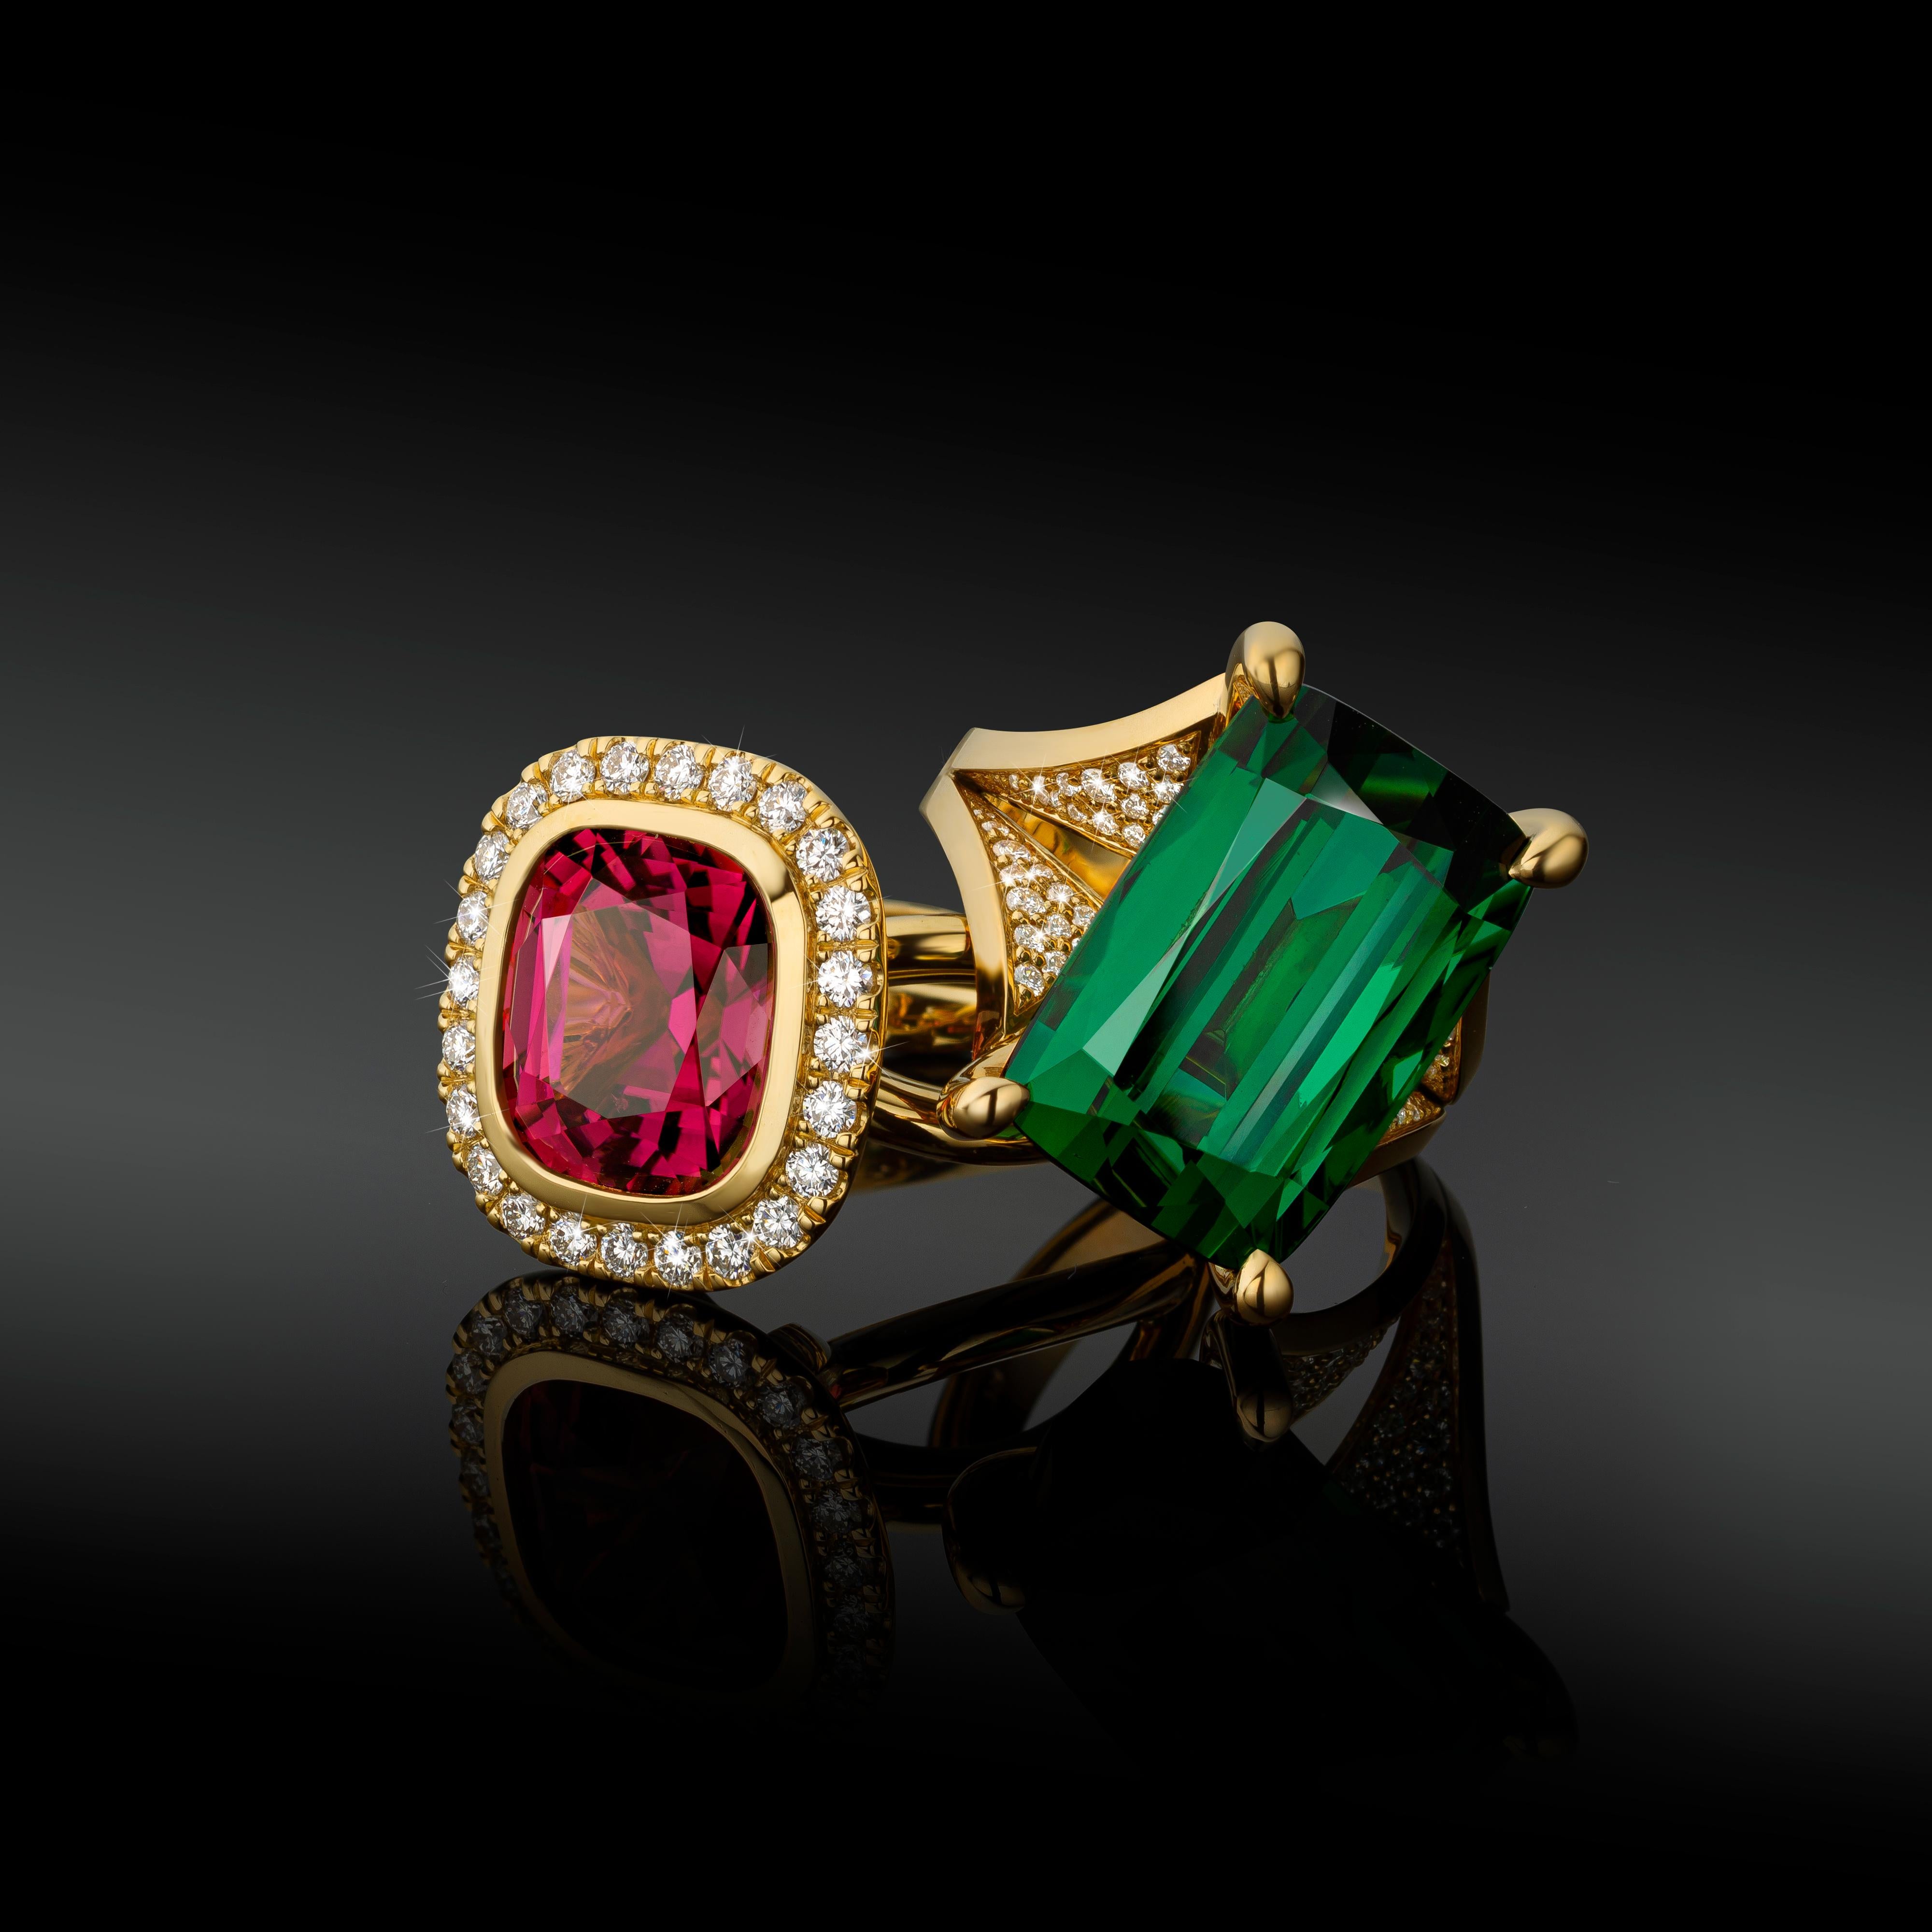 Cober “Playful Pink” with a deep pink Tourmaline and 24 Diamonds YellowGold Ring For Sale 2